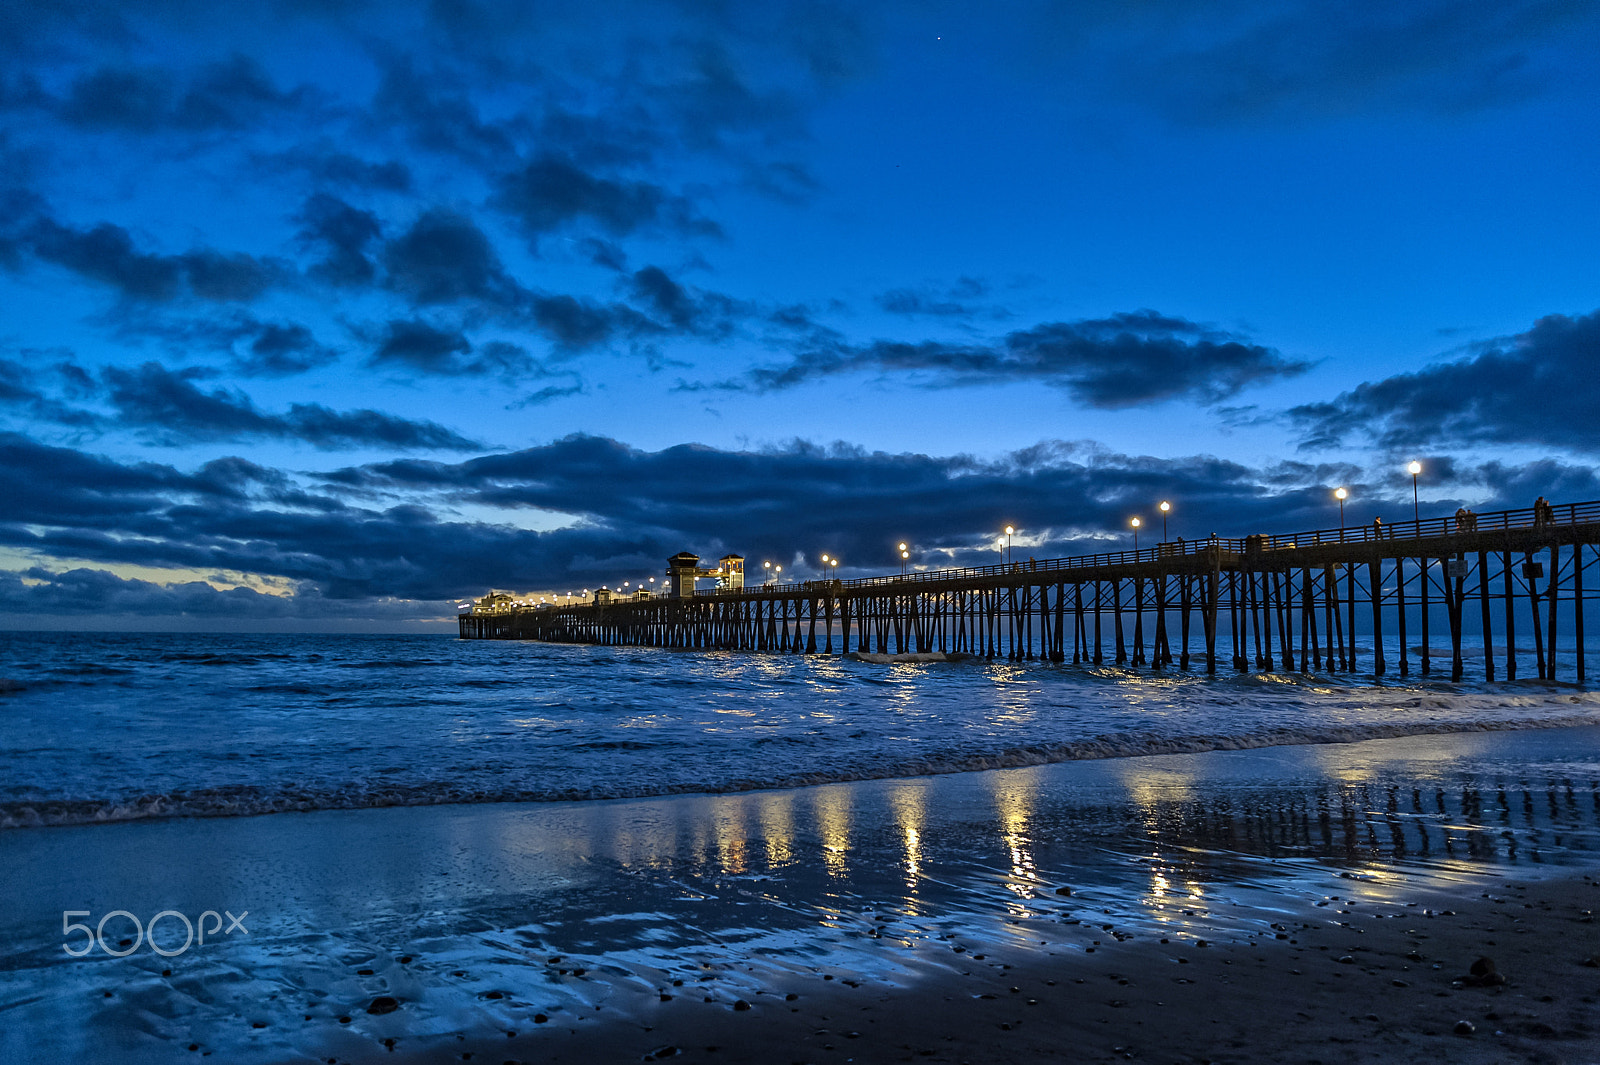 Nikon D700 sample photo. Twilight at the oceanside pier - february 26, 2017 photography